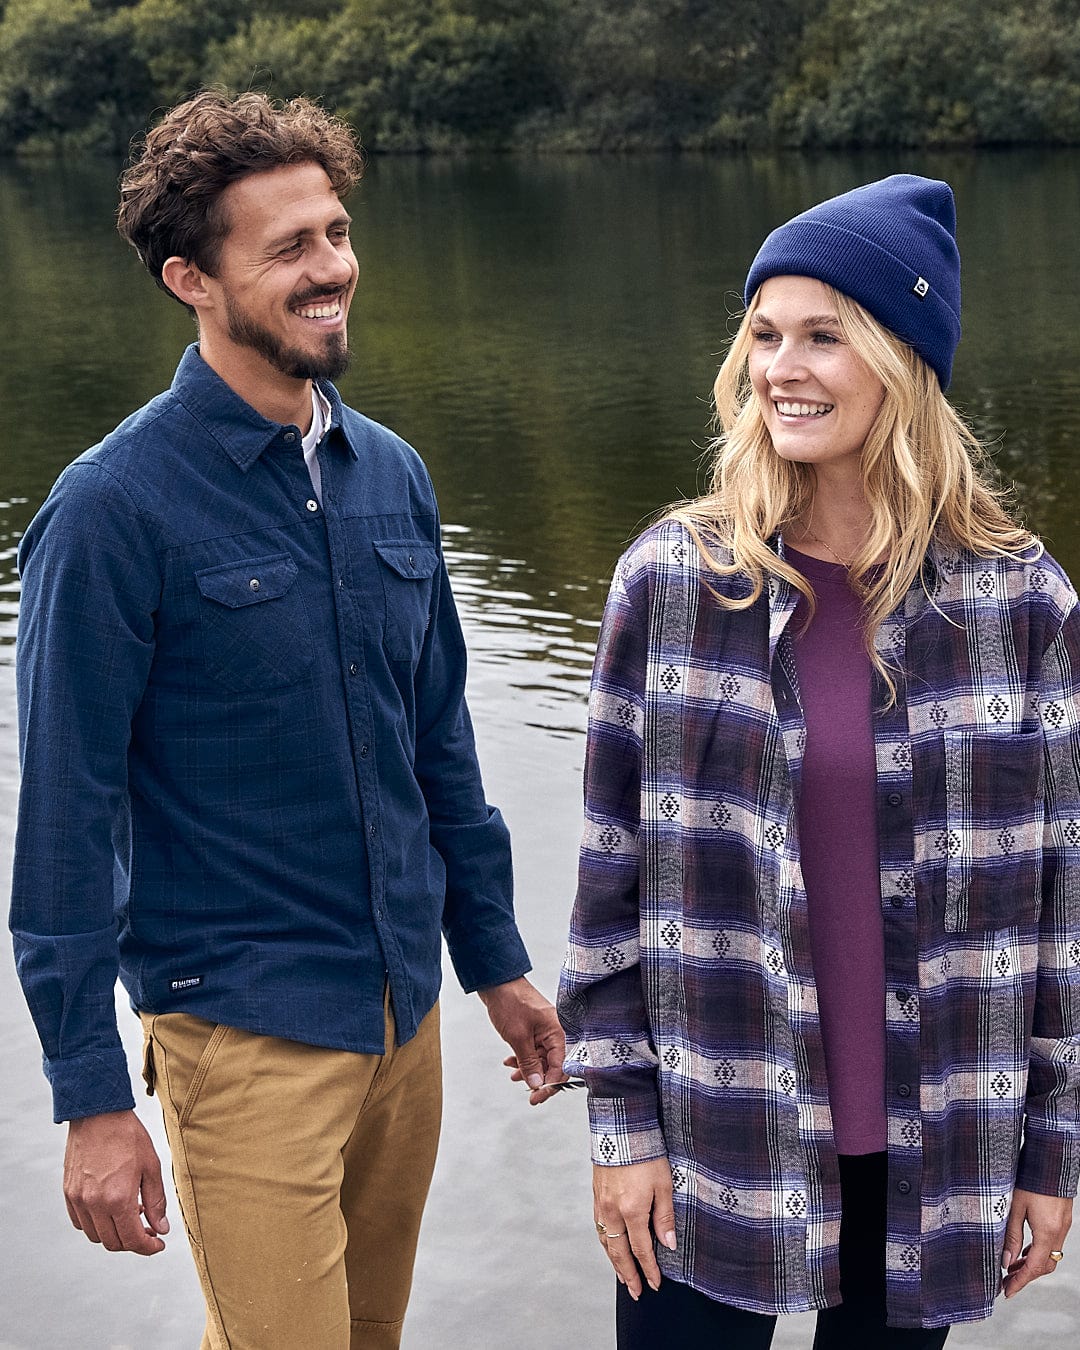 A man and woman standing next to a body of water wearing the Saltrock Jaxon - Mens Check Long Sleeve Shirt in Dark Blue.